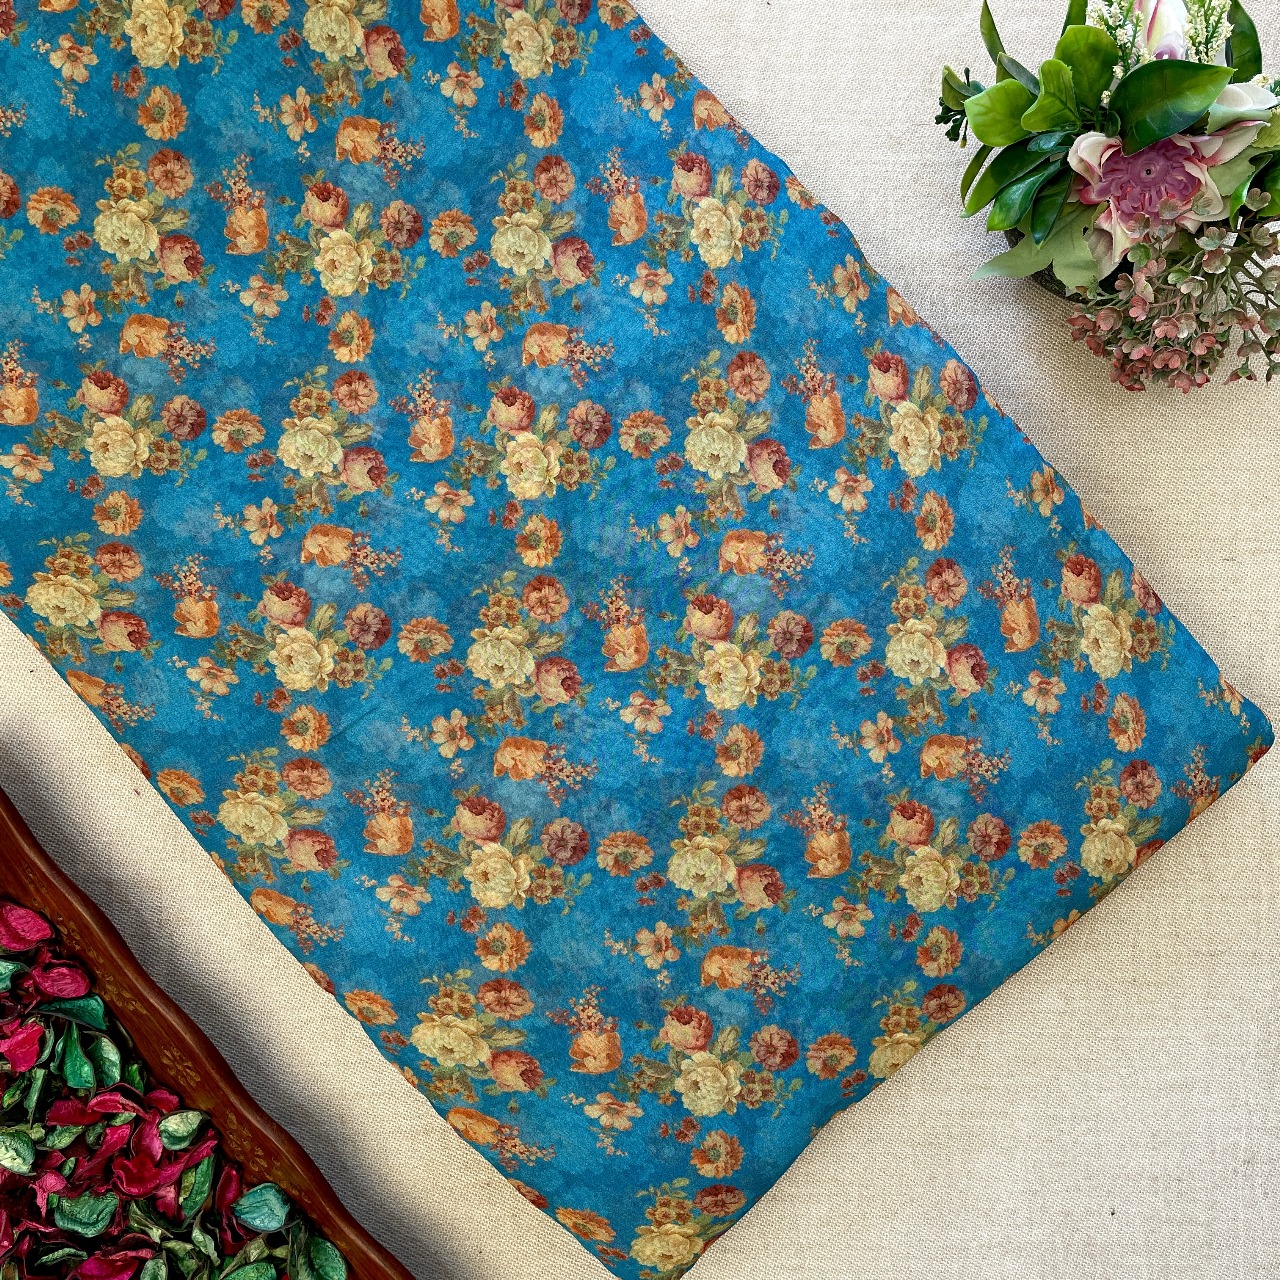 Pure Georgette Printed Fabric - Blue/Yellow - Floral